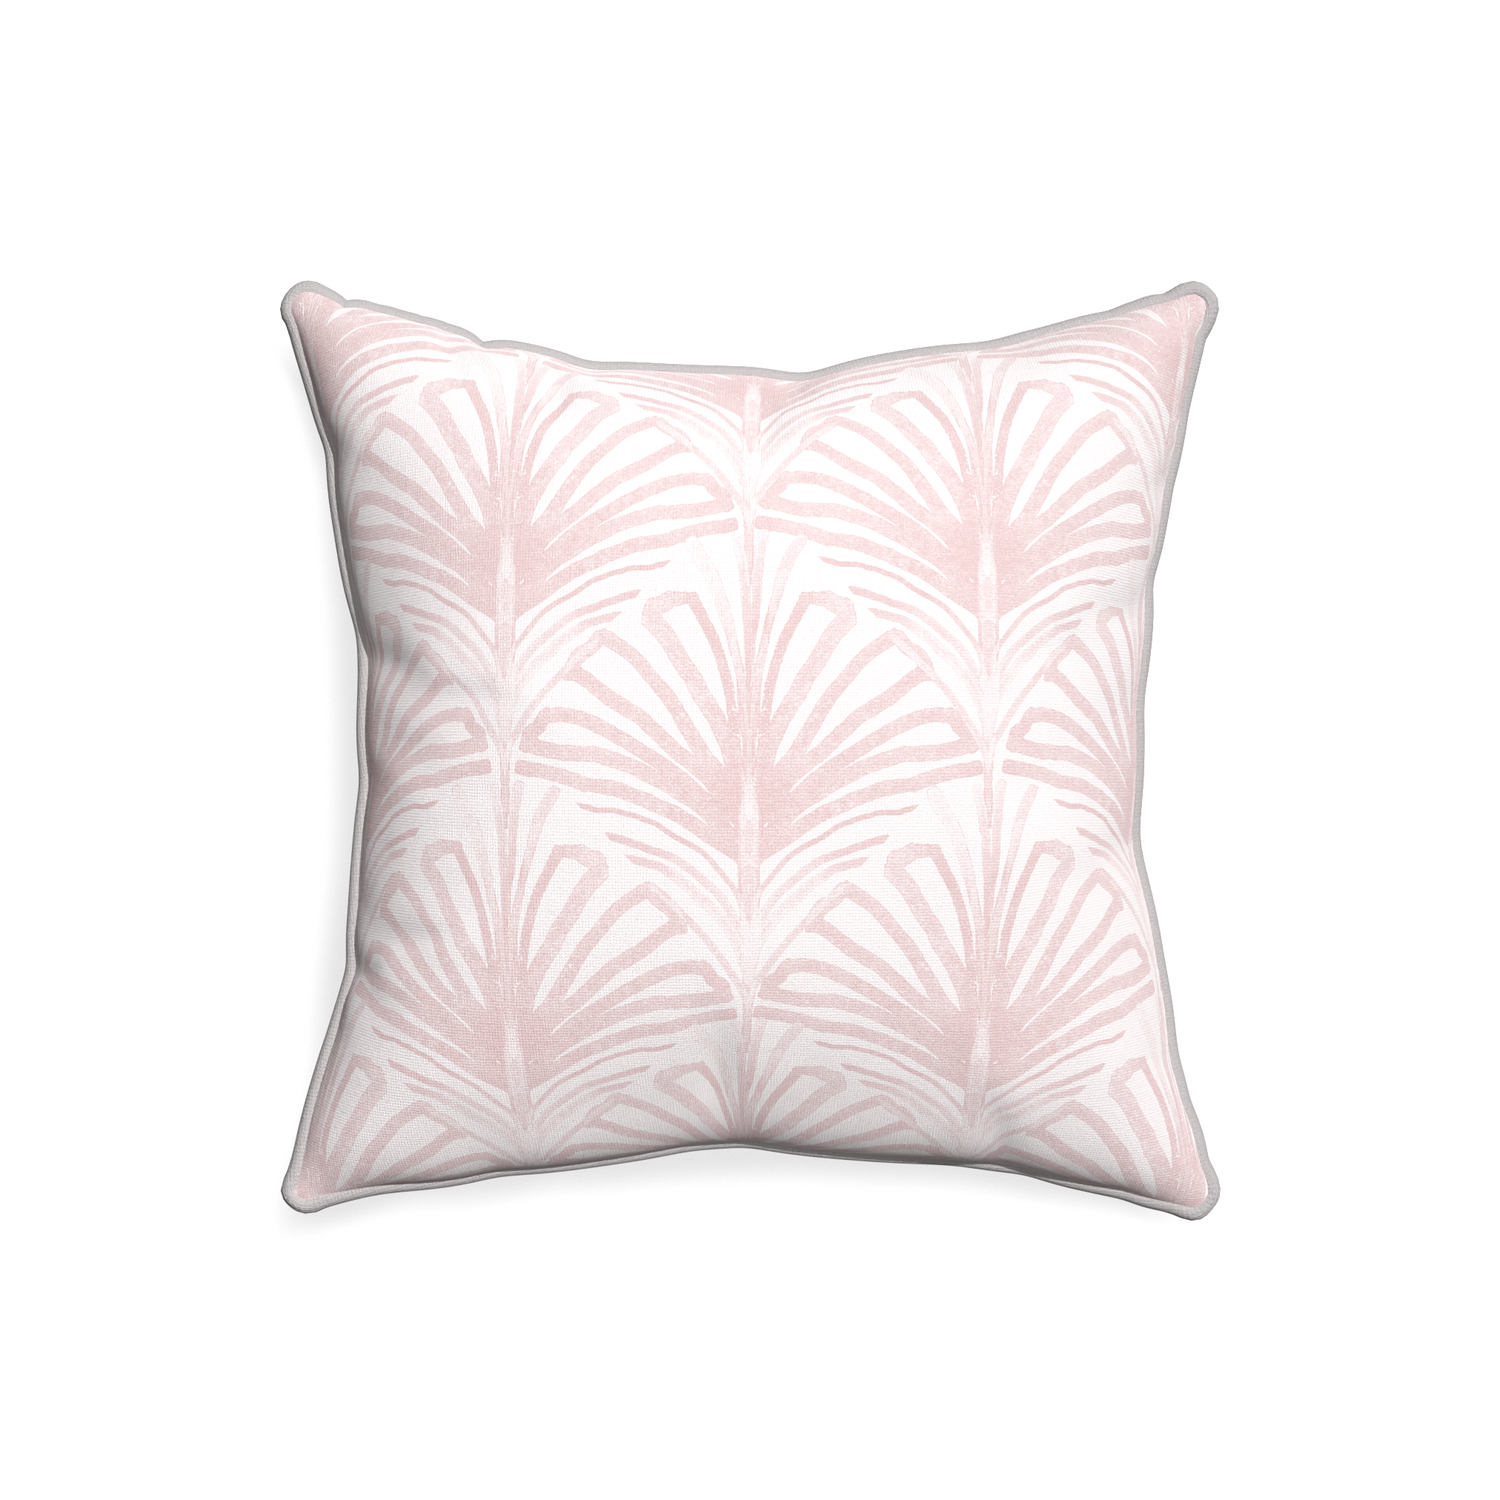 20-square suzy rose custom pillow with pebble piping on white background